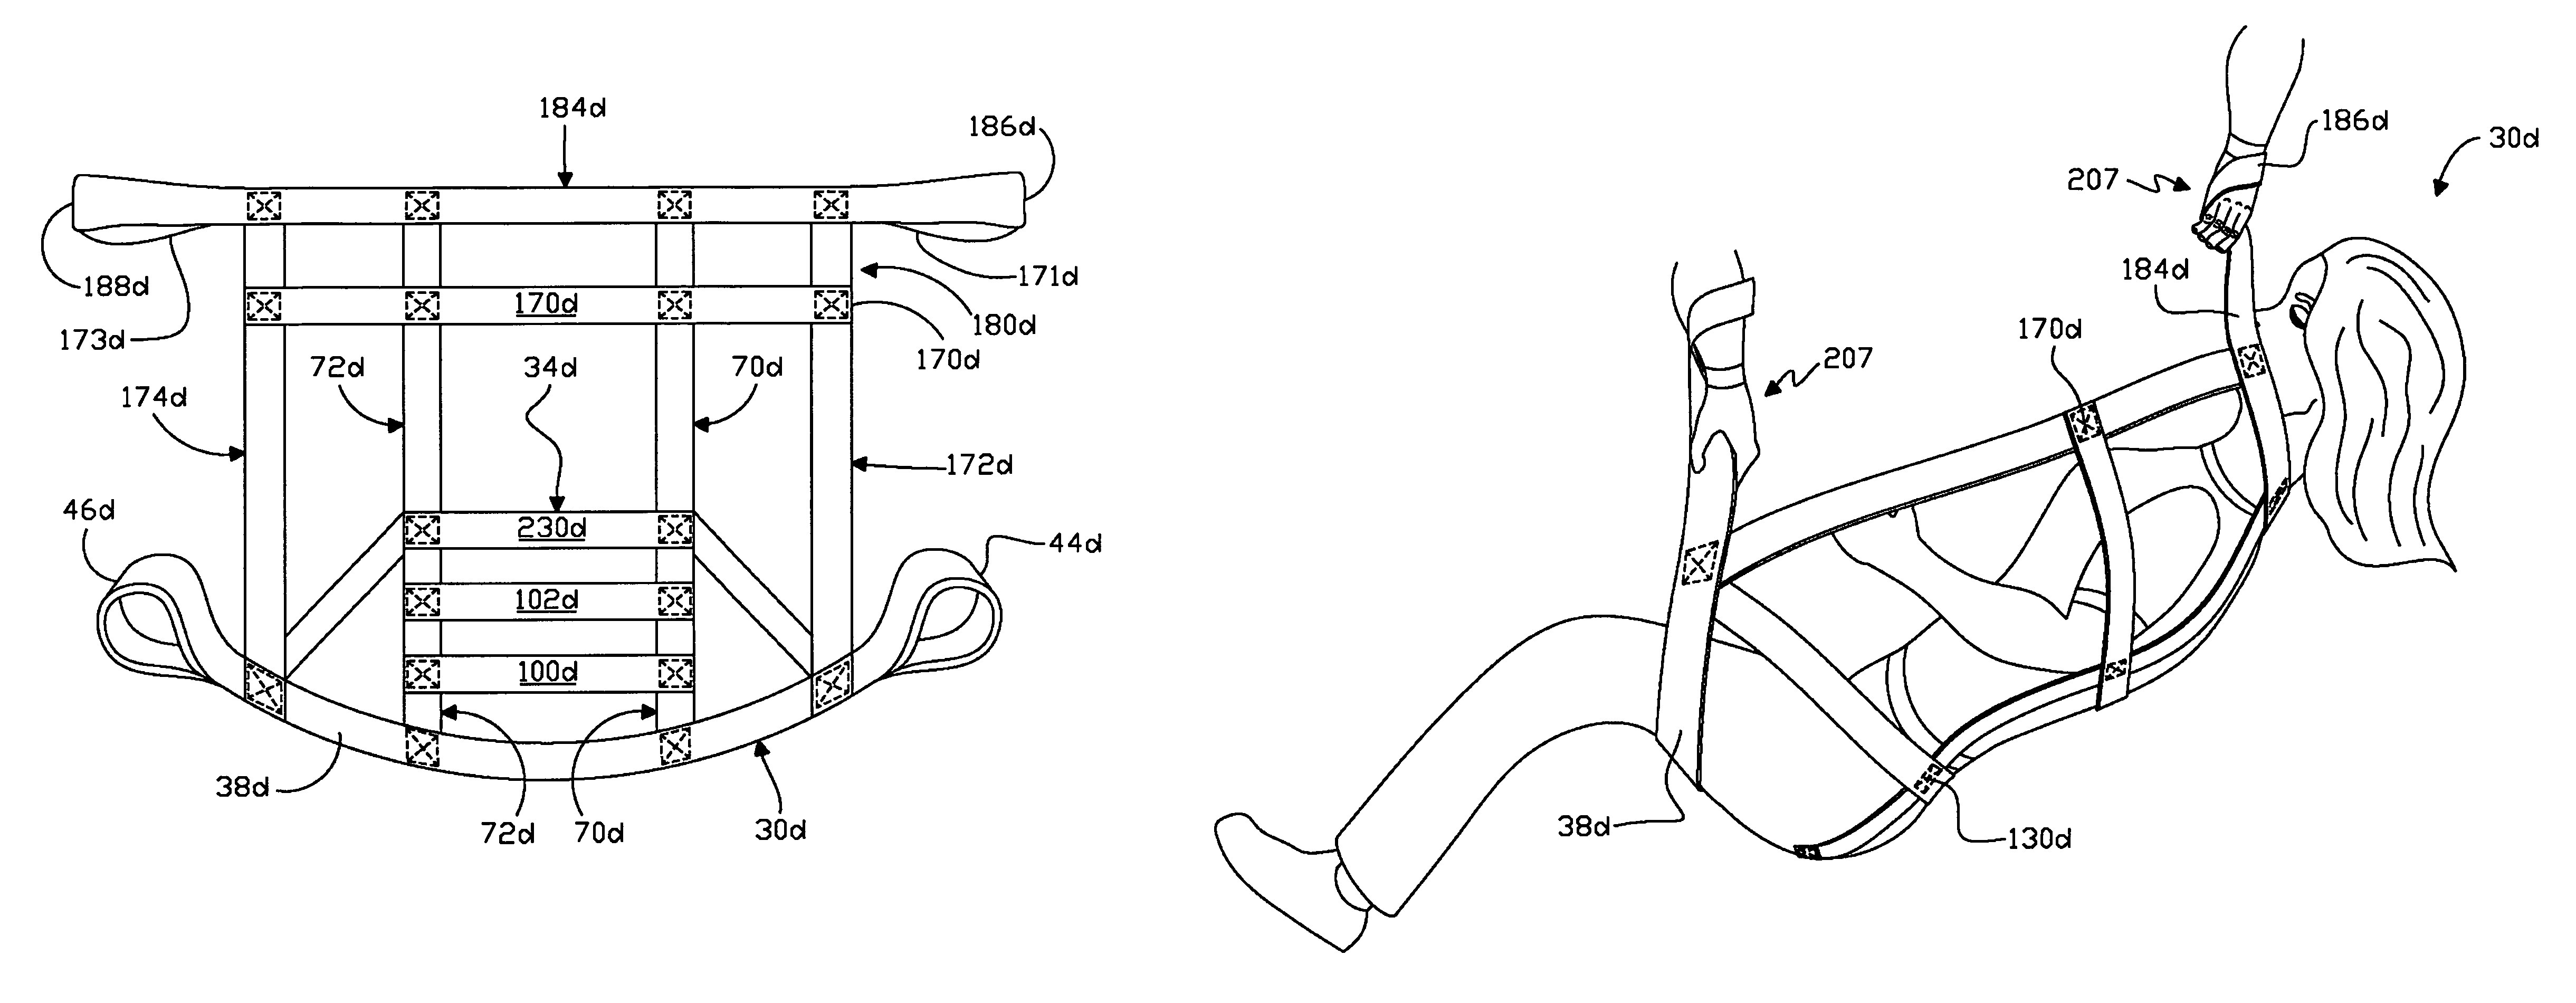 Sling for extracting and transporting people